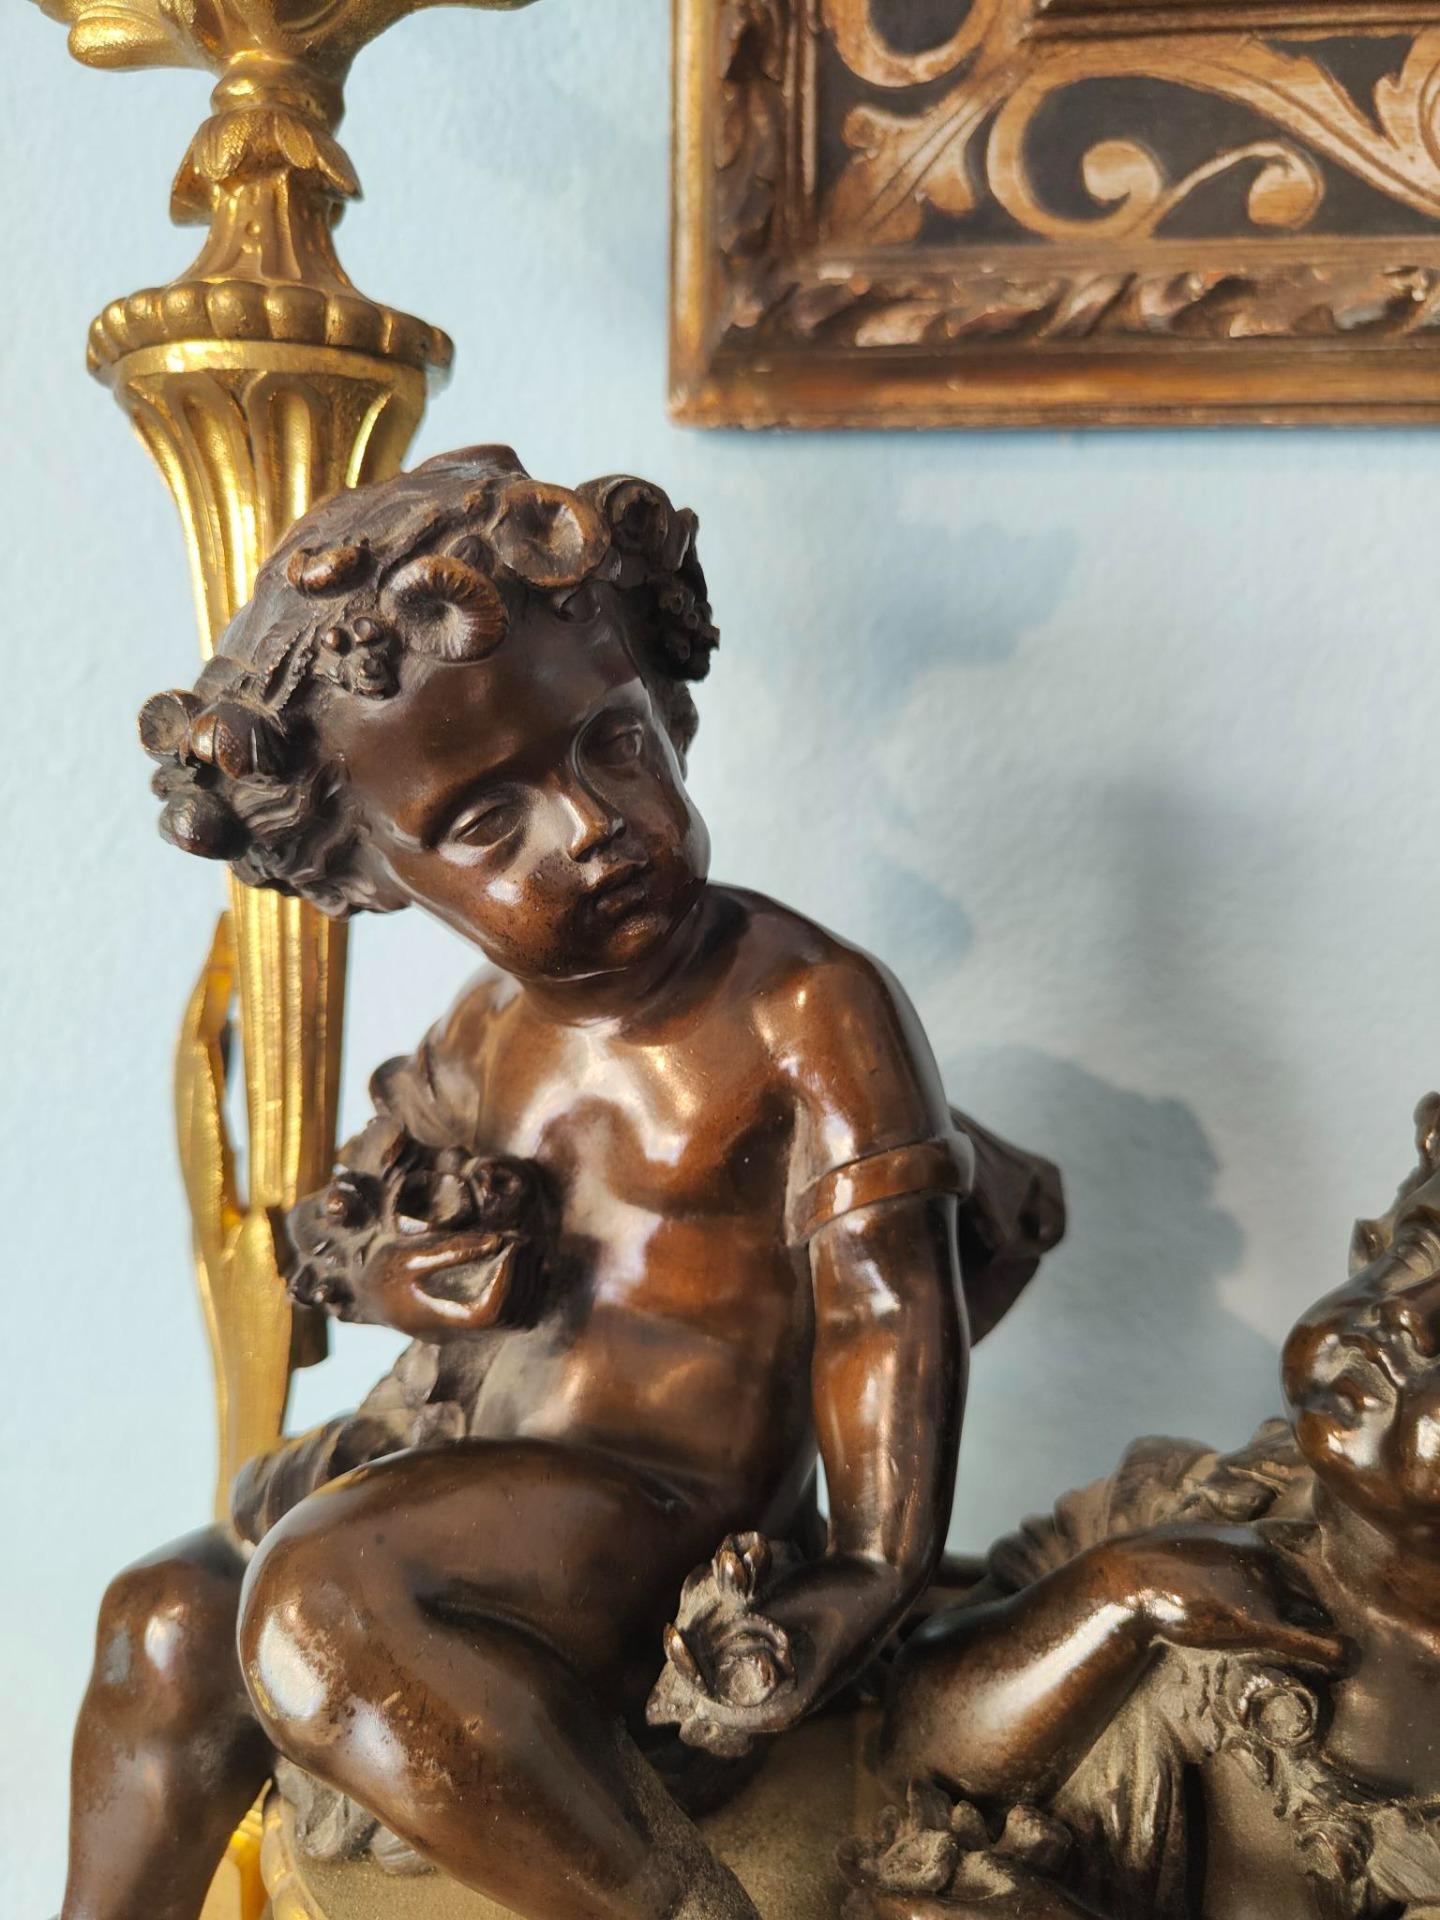 Important and large Fireplace Wing made of gilt bronze and burnished bronze putti, high quality decoration visible in the workmanship of the putti and various floral elements in gilt bronze. Every element is taken care of in detail, the faces of the